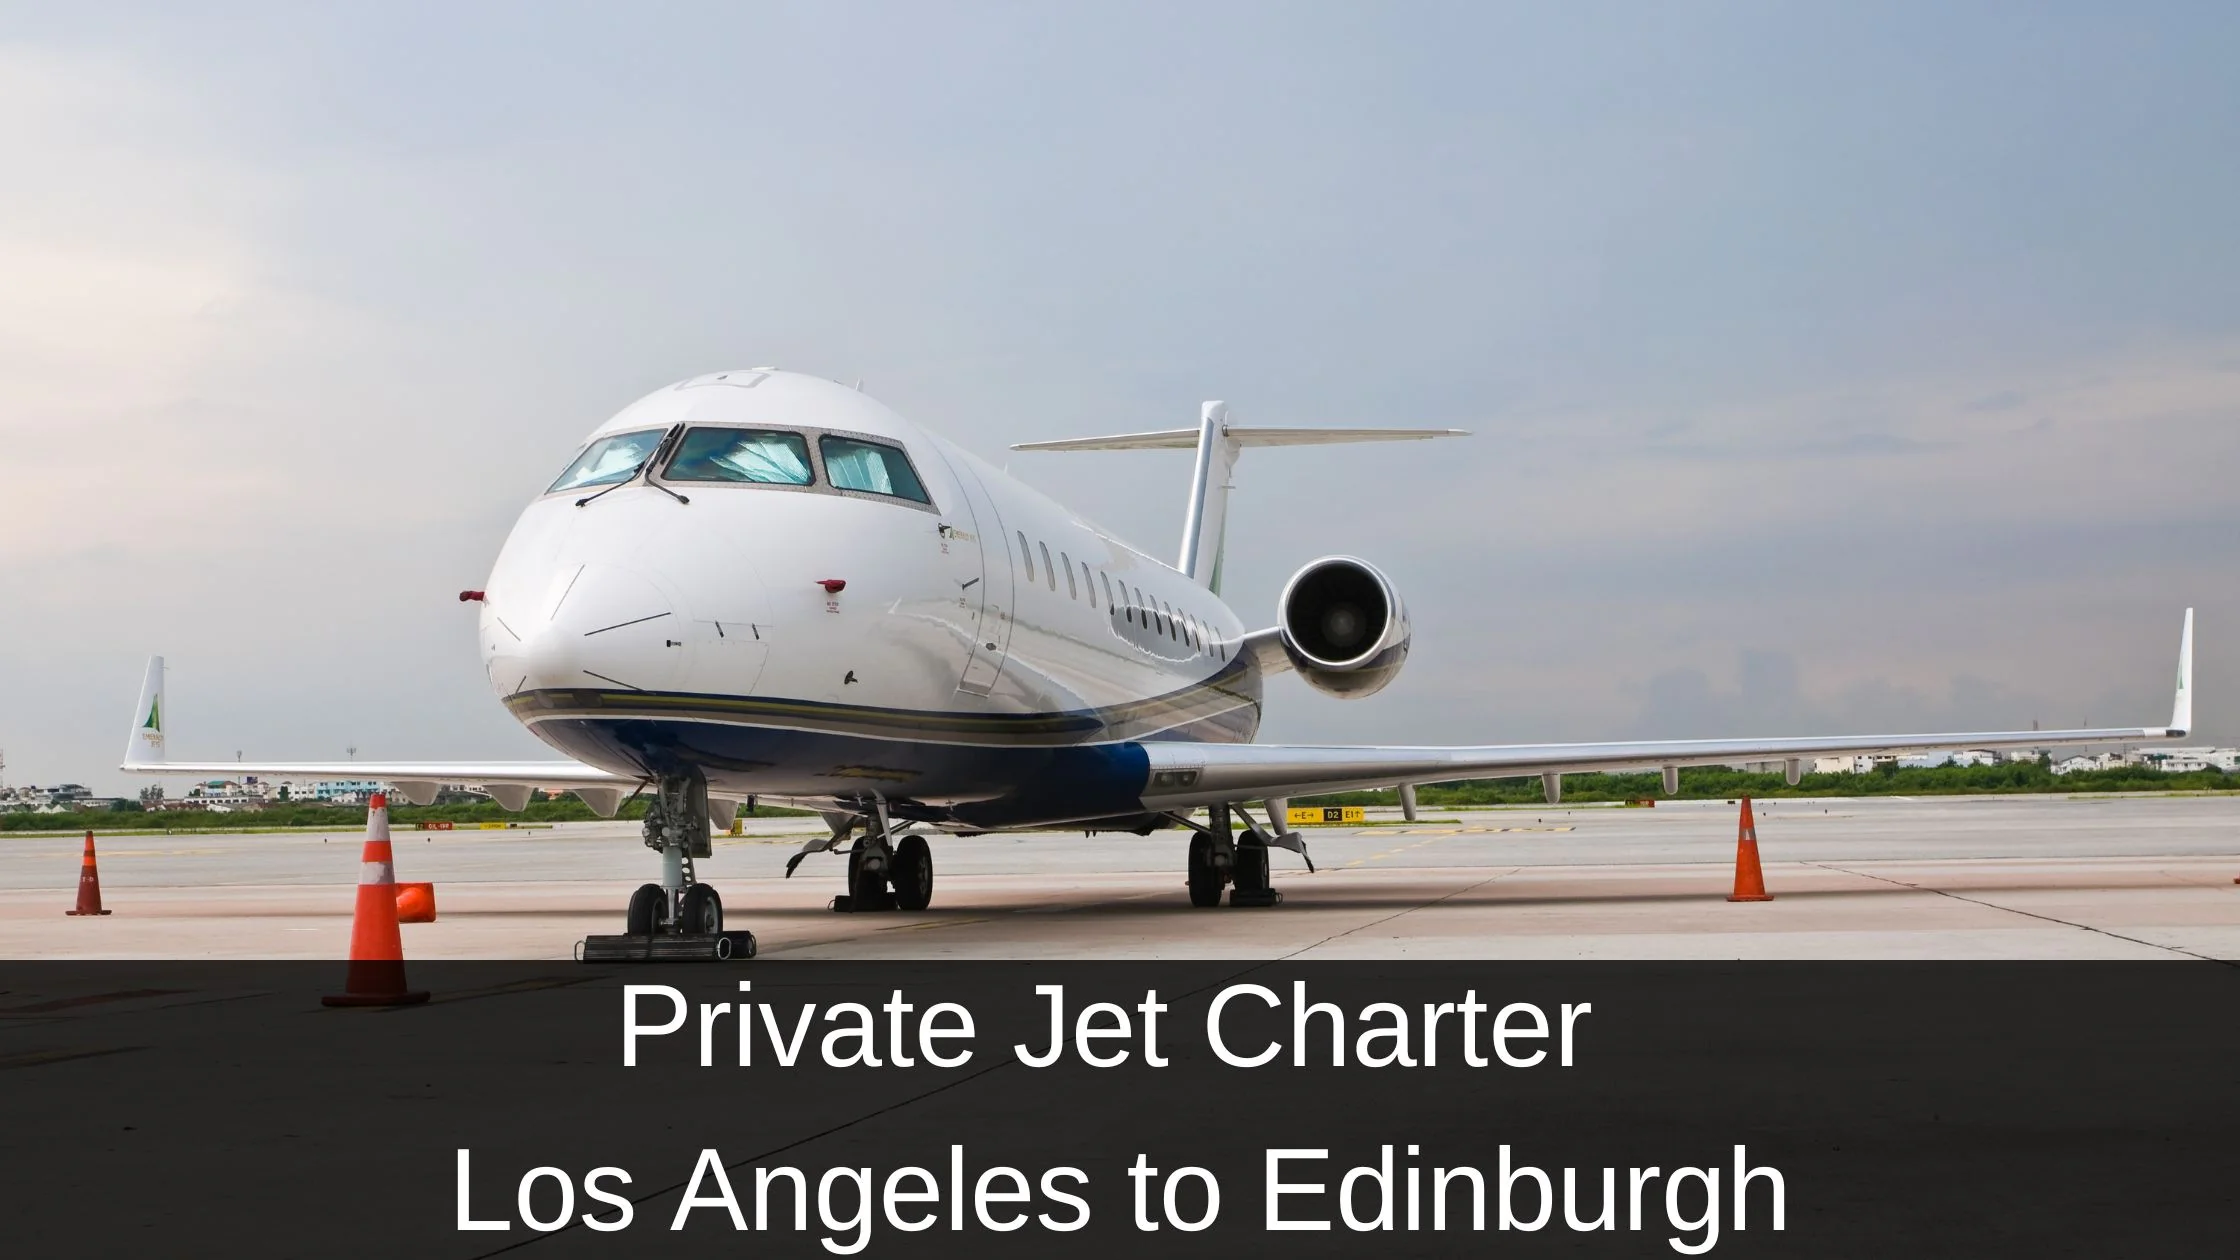 Private Jet Charter from Los Angeles to Edinburgh